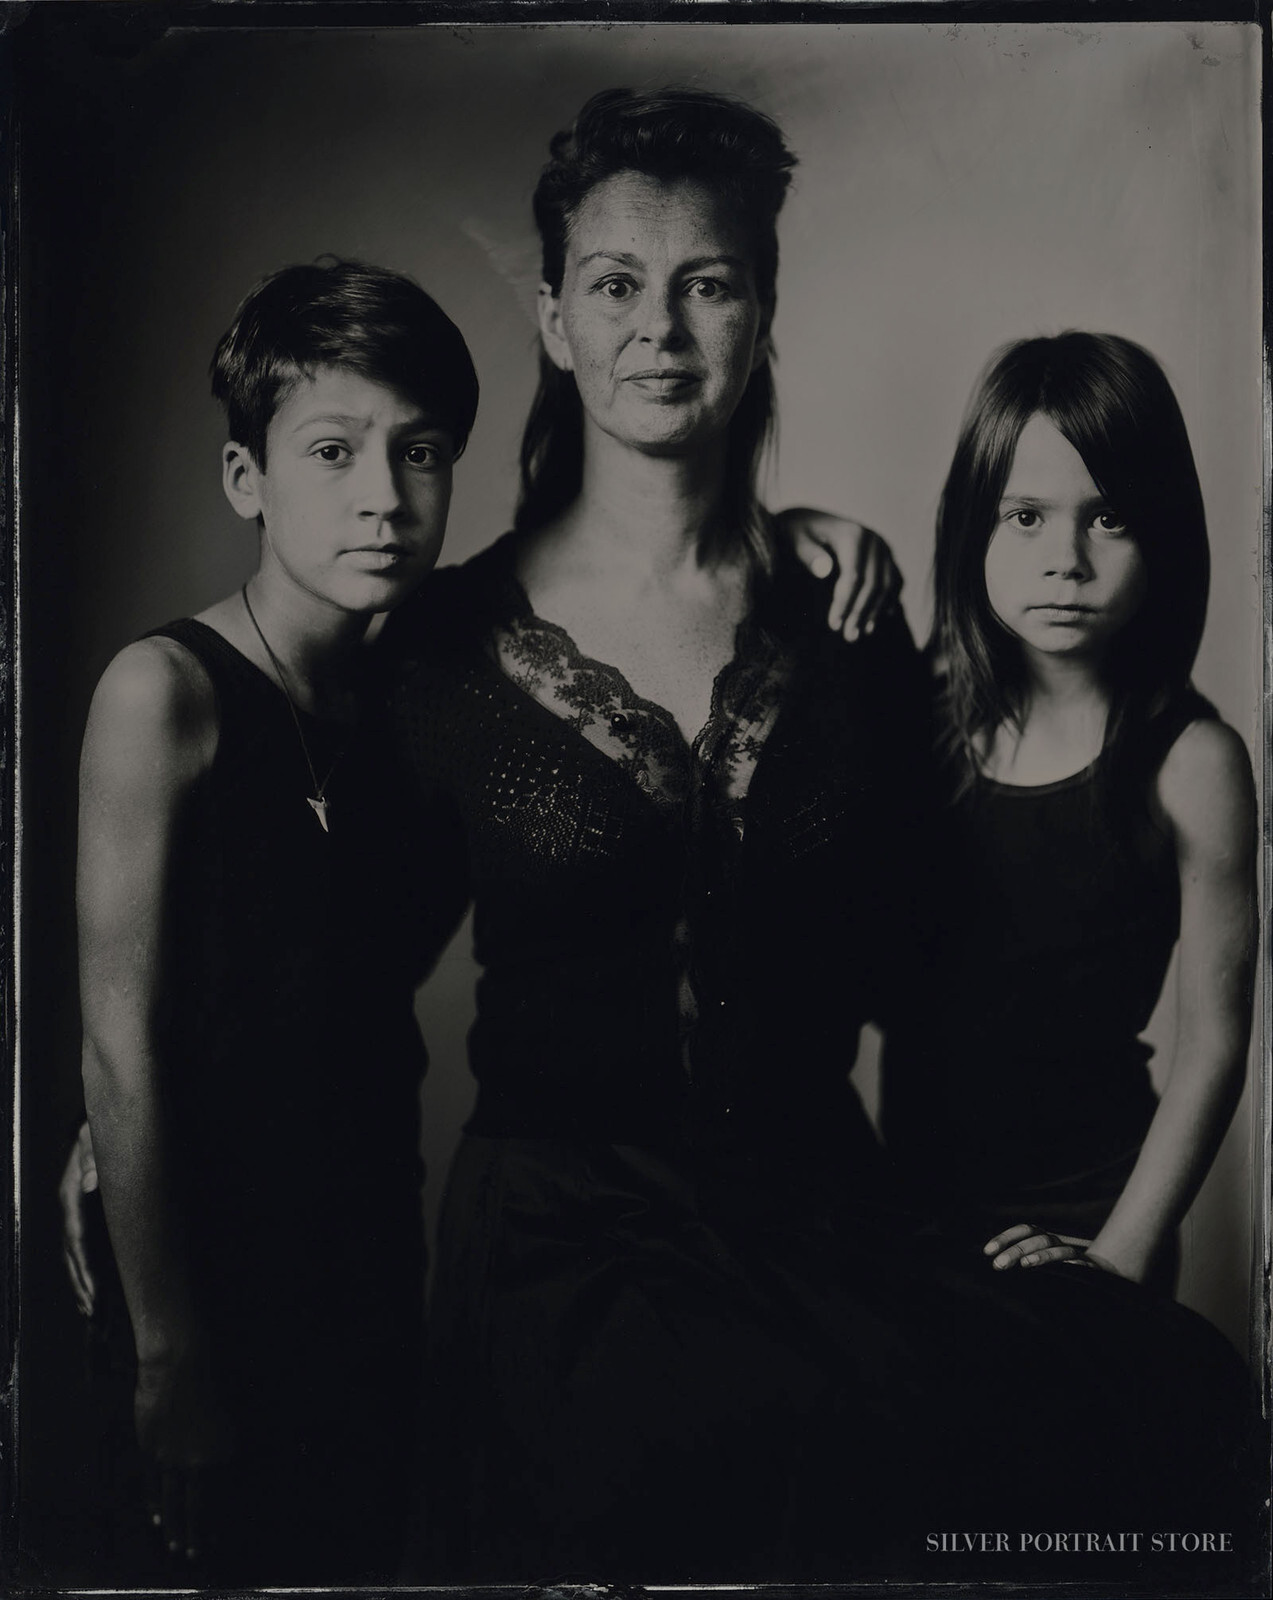 Pelle, Rian & India-Silver Portrait Store-Wet plate collodion-Tintype 20 x 25 cm.